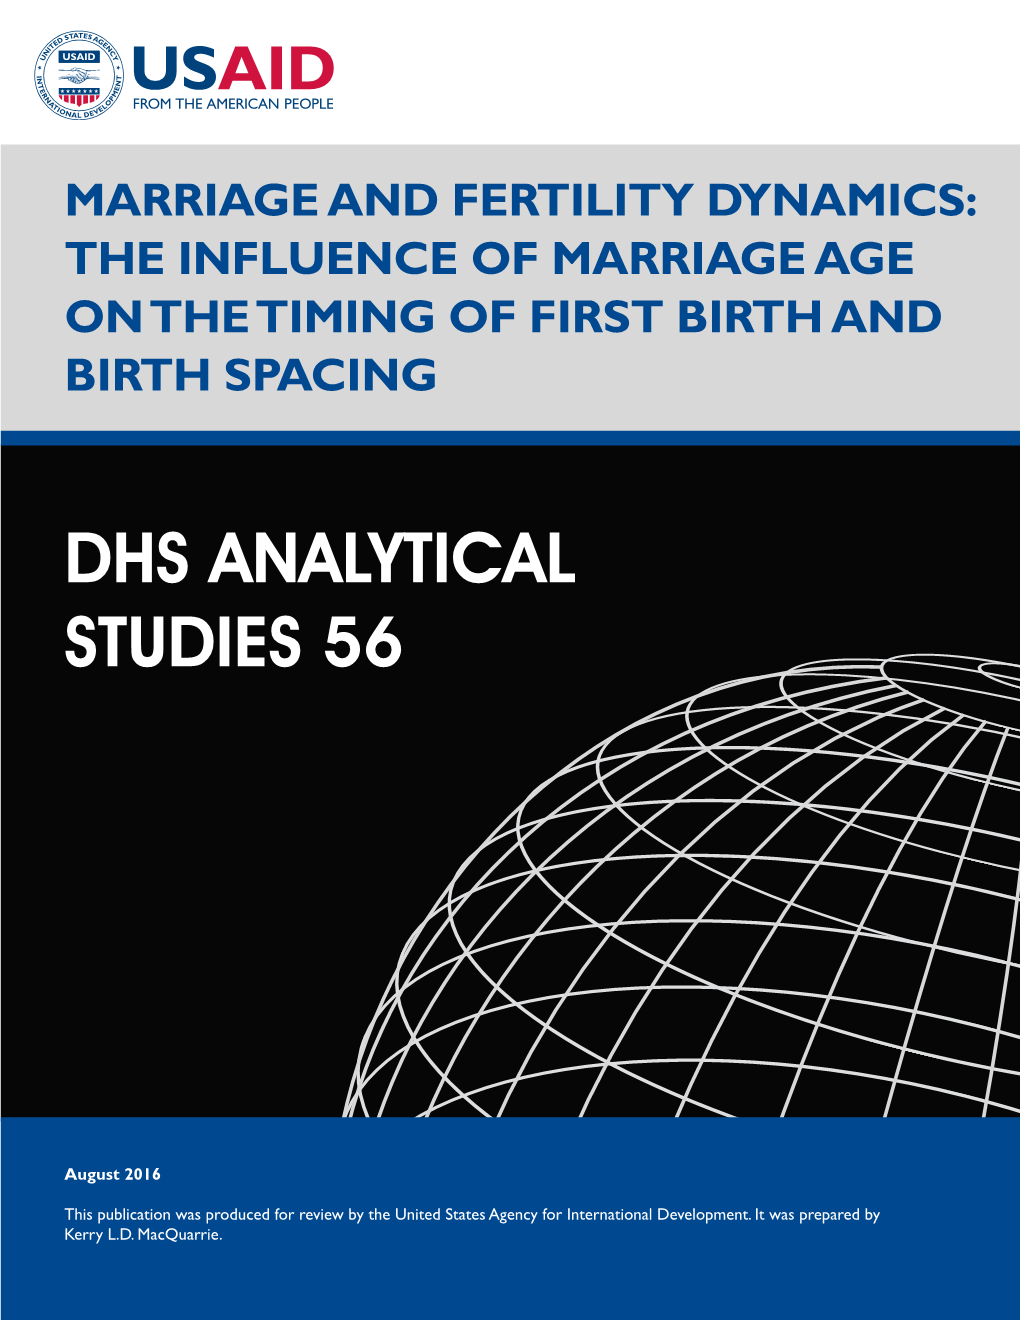 The Influence of Marriage Age on the Timing of First Birth and Birth Spacing